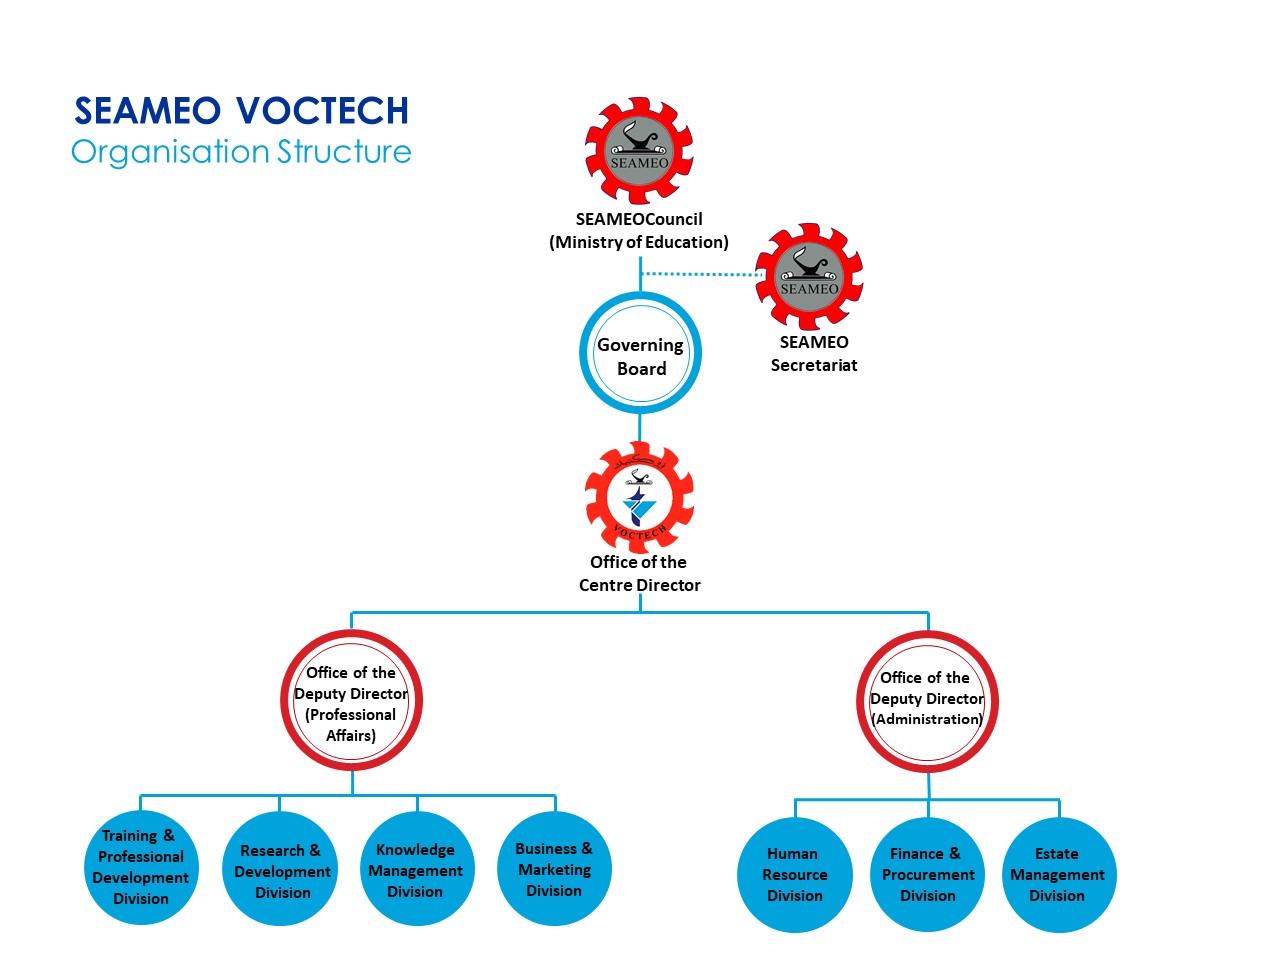 SV Organisational Structure 18 May 2020.jpg